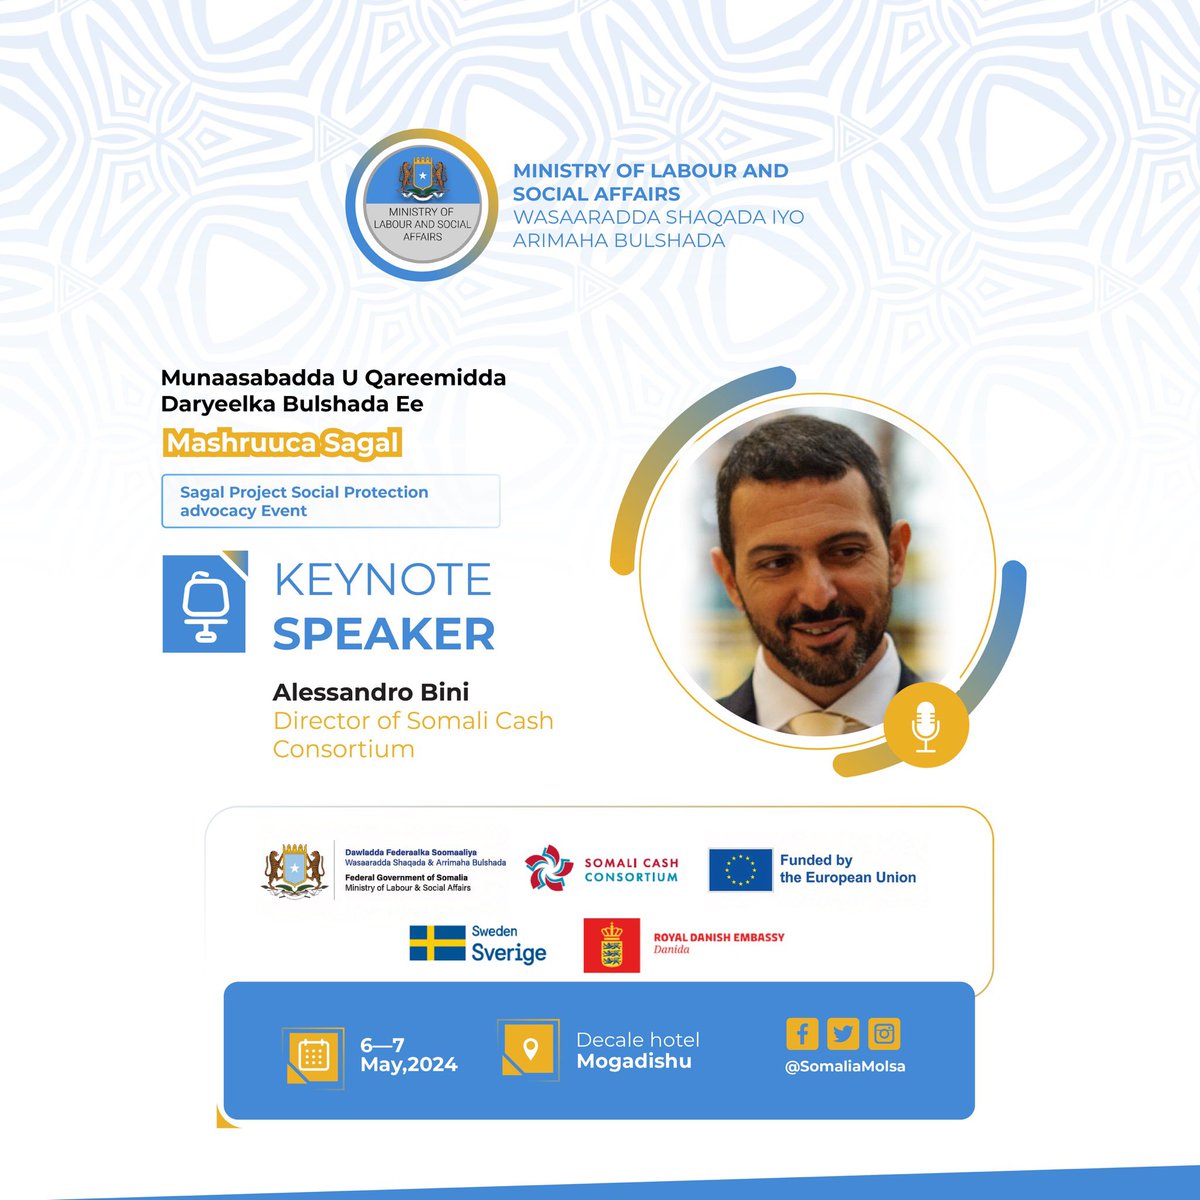 The Director of the @Somali_Cash, Mr. @alesbin, is a keynote speaker at the Sagal Project Social Protection event scheduled for May 6th and 7th in Mogadishu. #SocialProtection